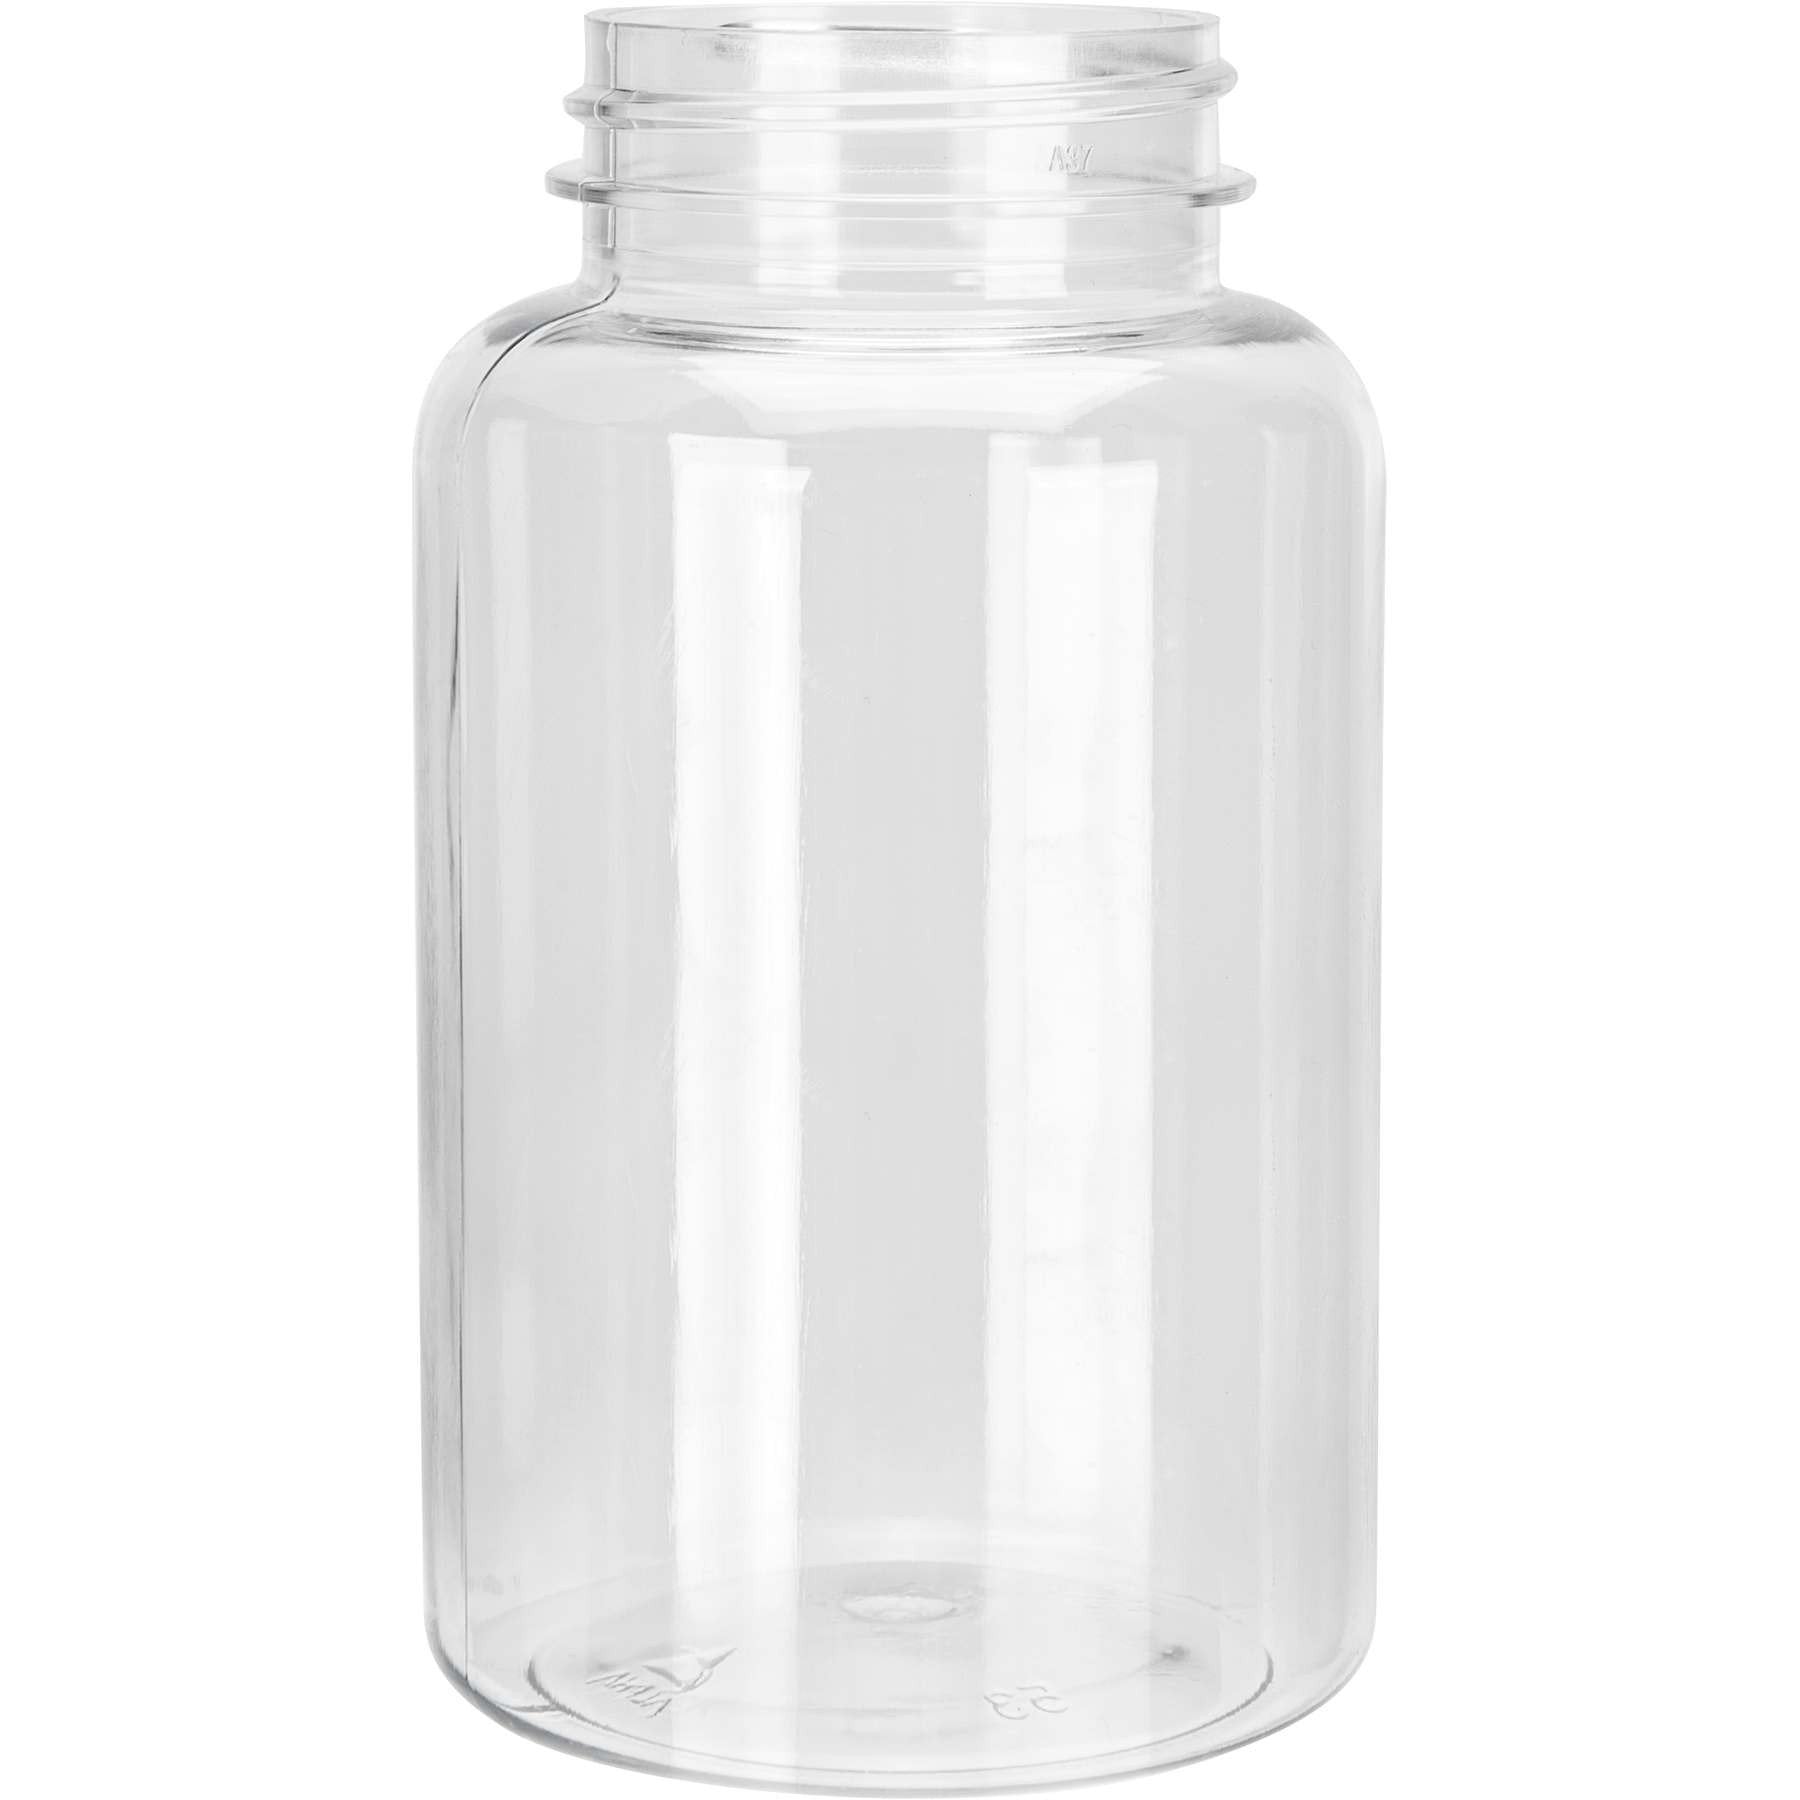 250cc Clear PET pill packer bottle with 45-400 neck finish CASED 308 - Rock Bottom Bottles / Packaging Company LLC